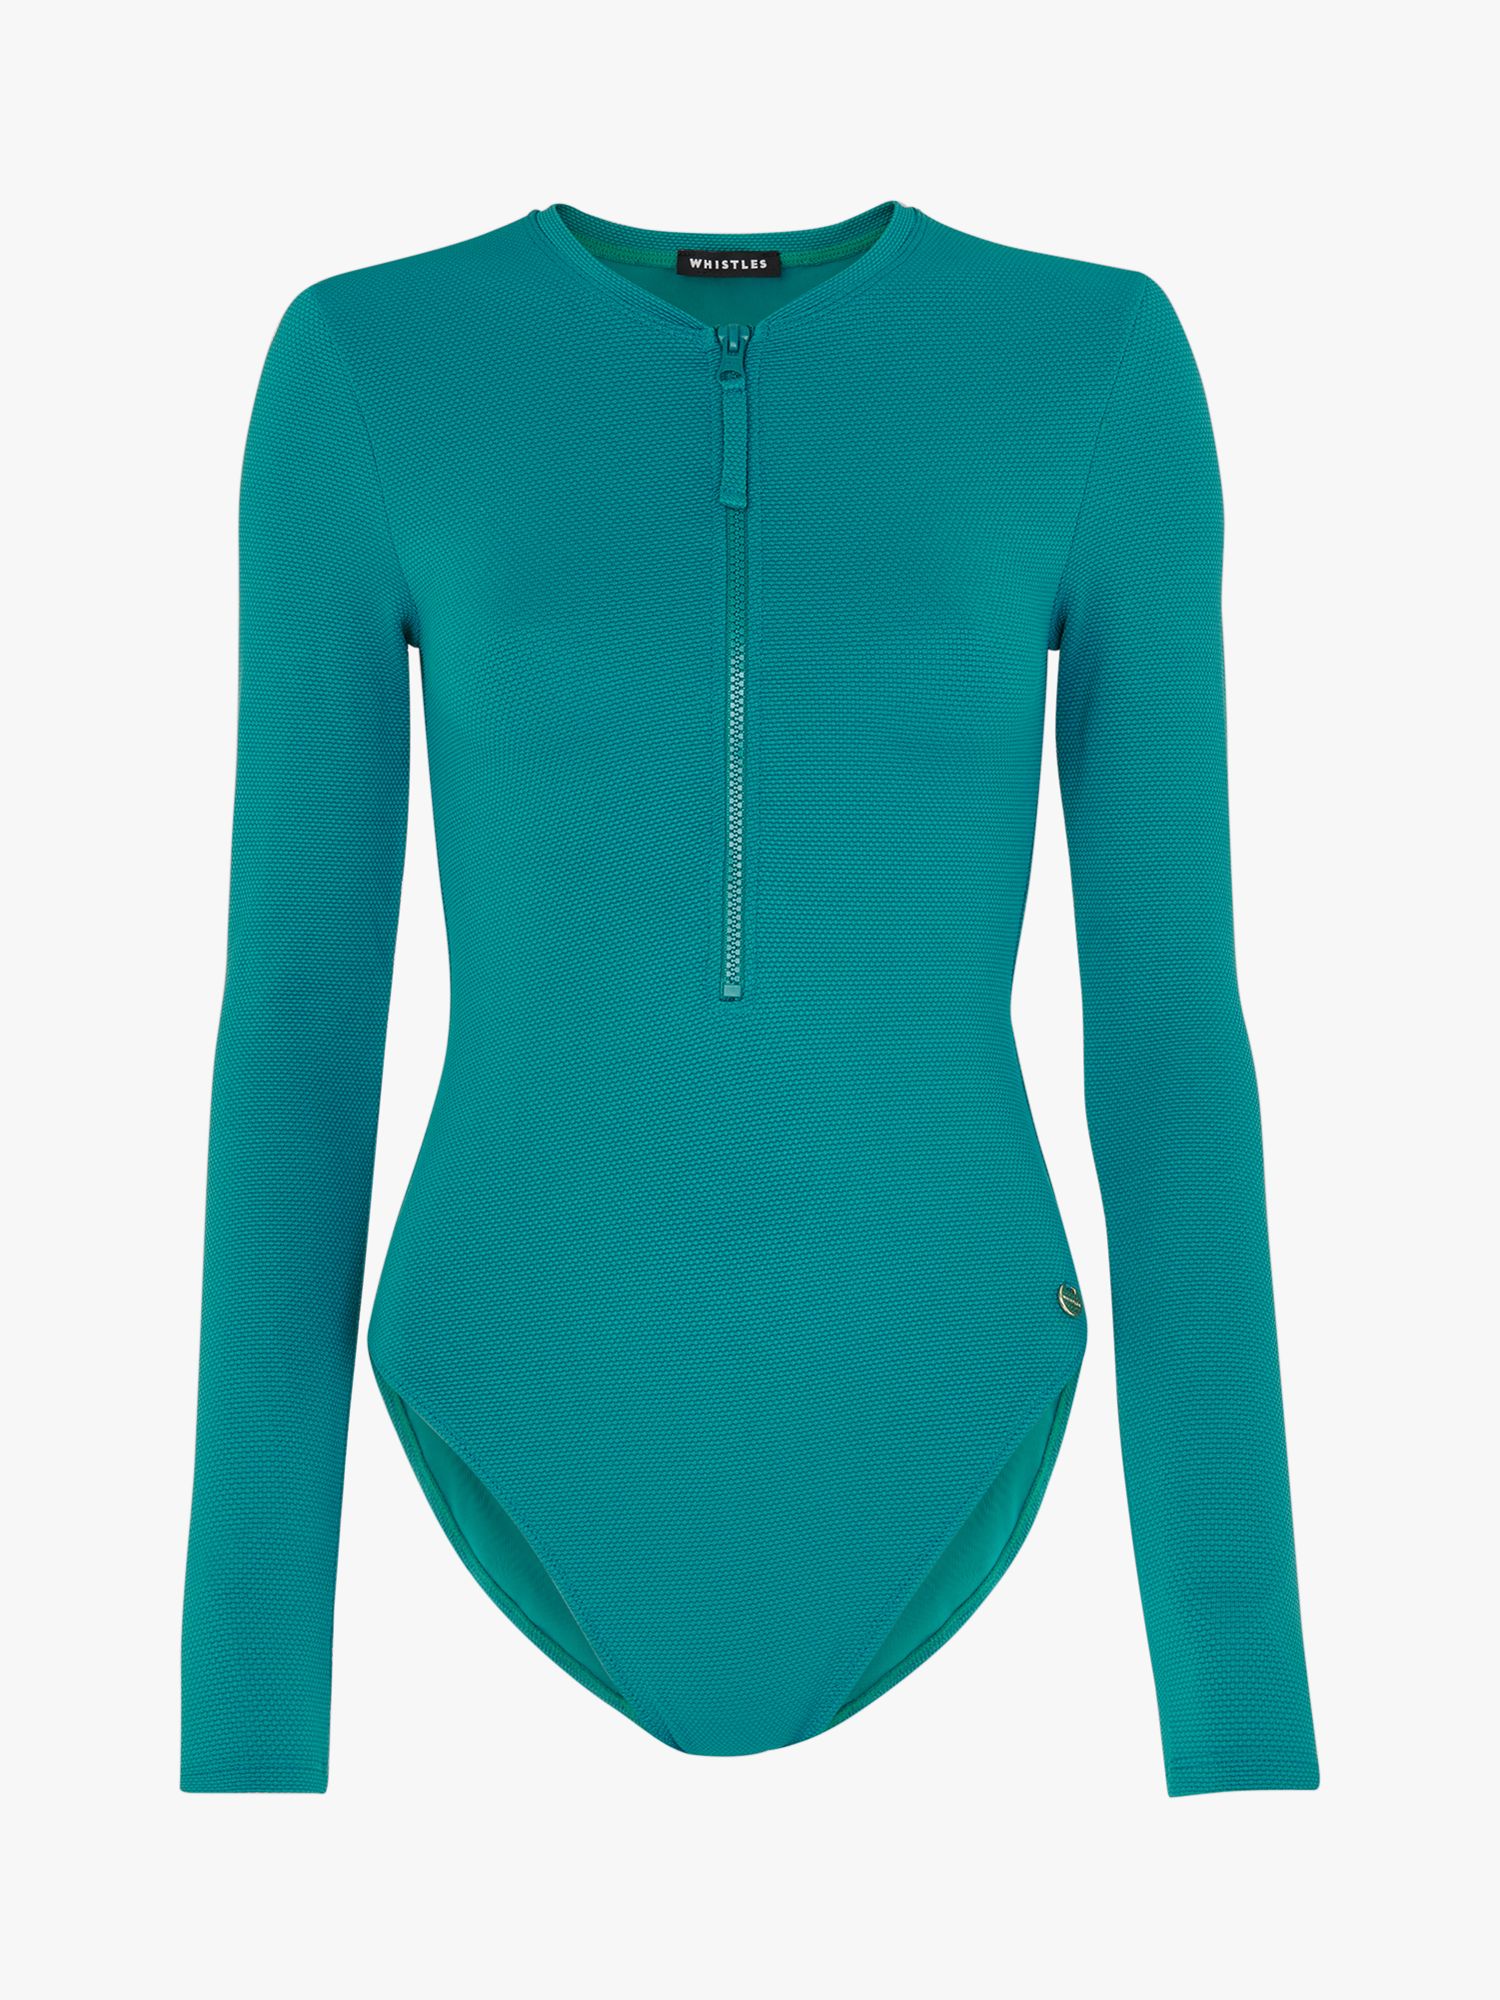 Whistles Long Sleeve Textured Swimsuit, Teal, 6